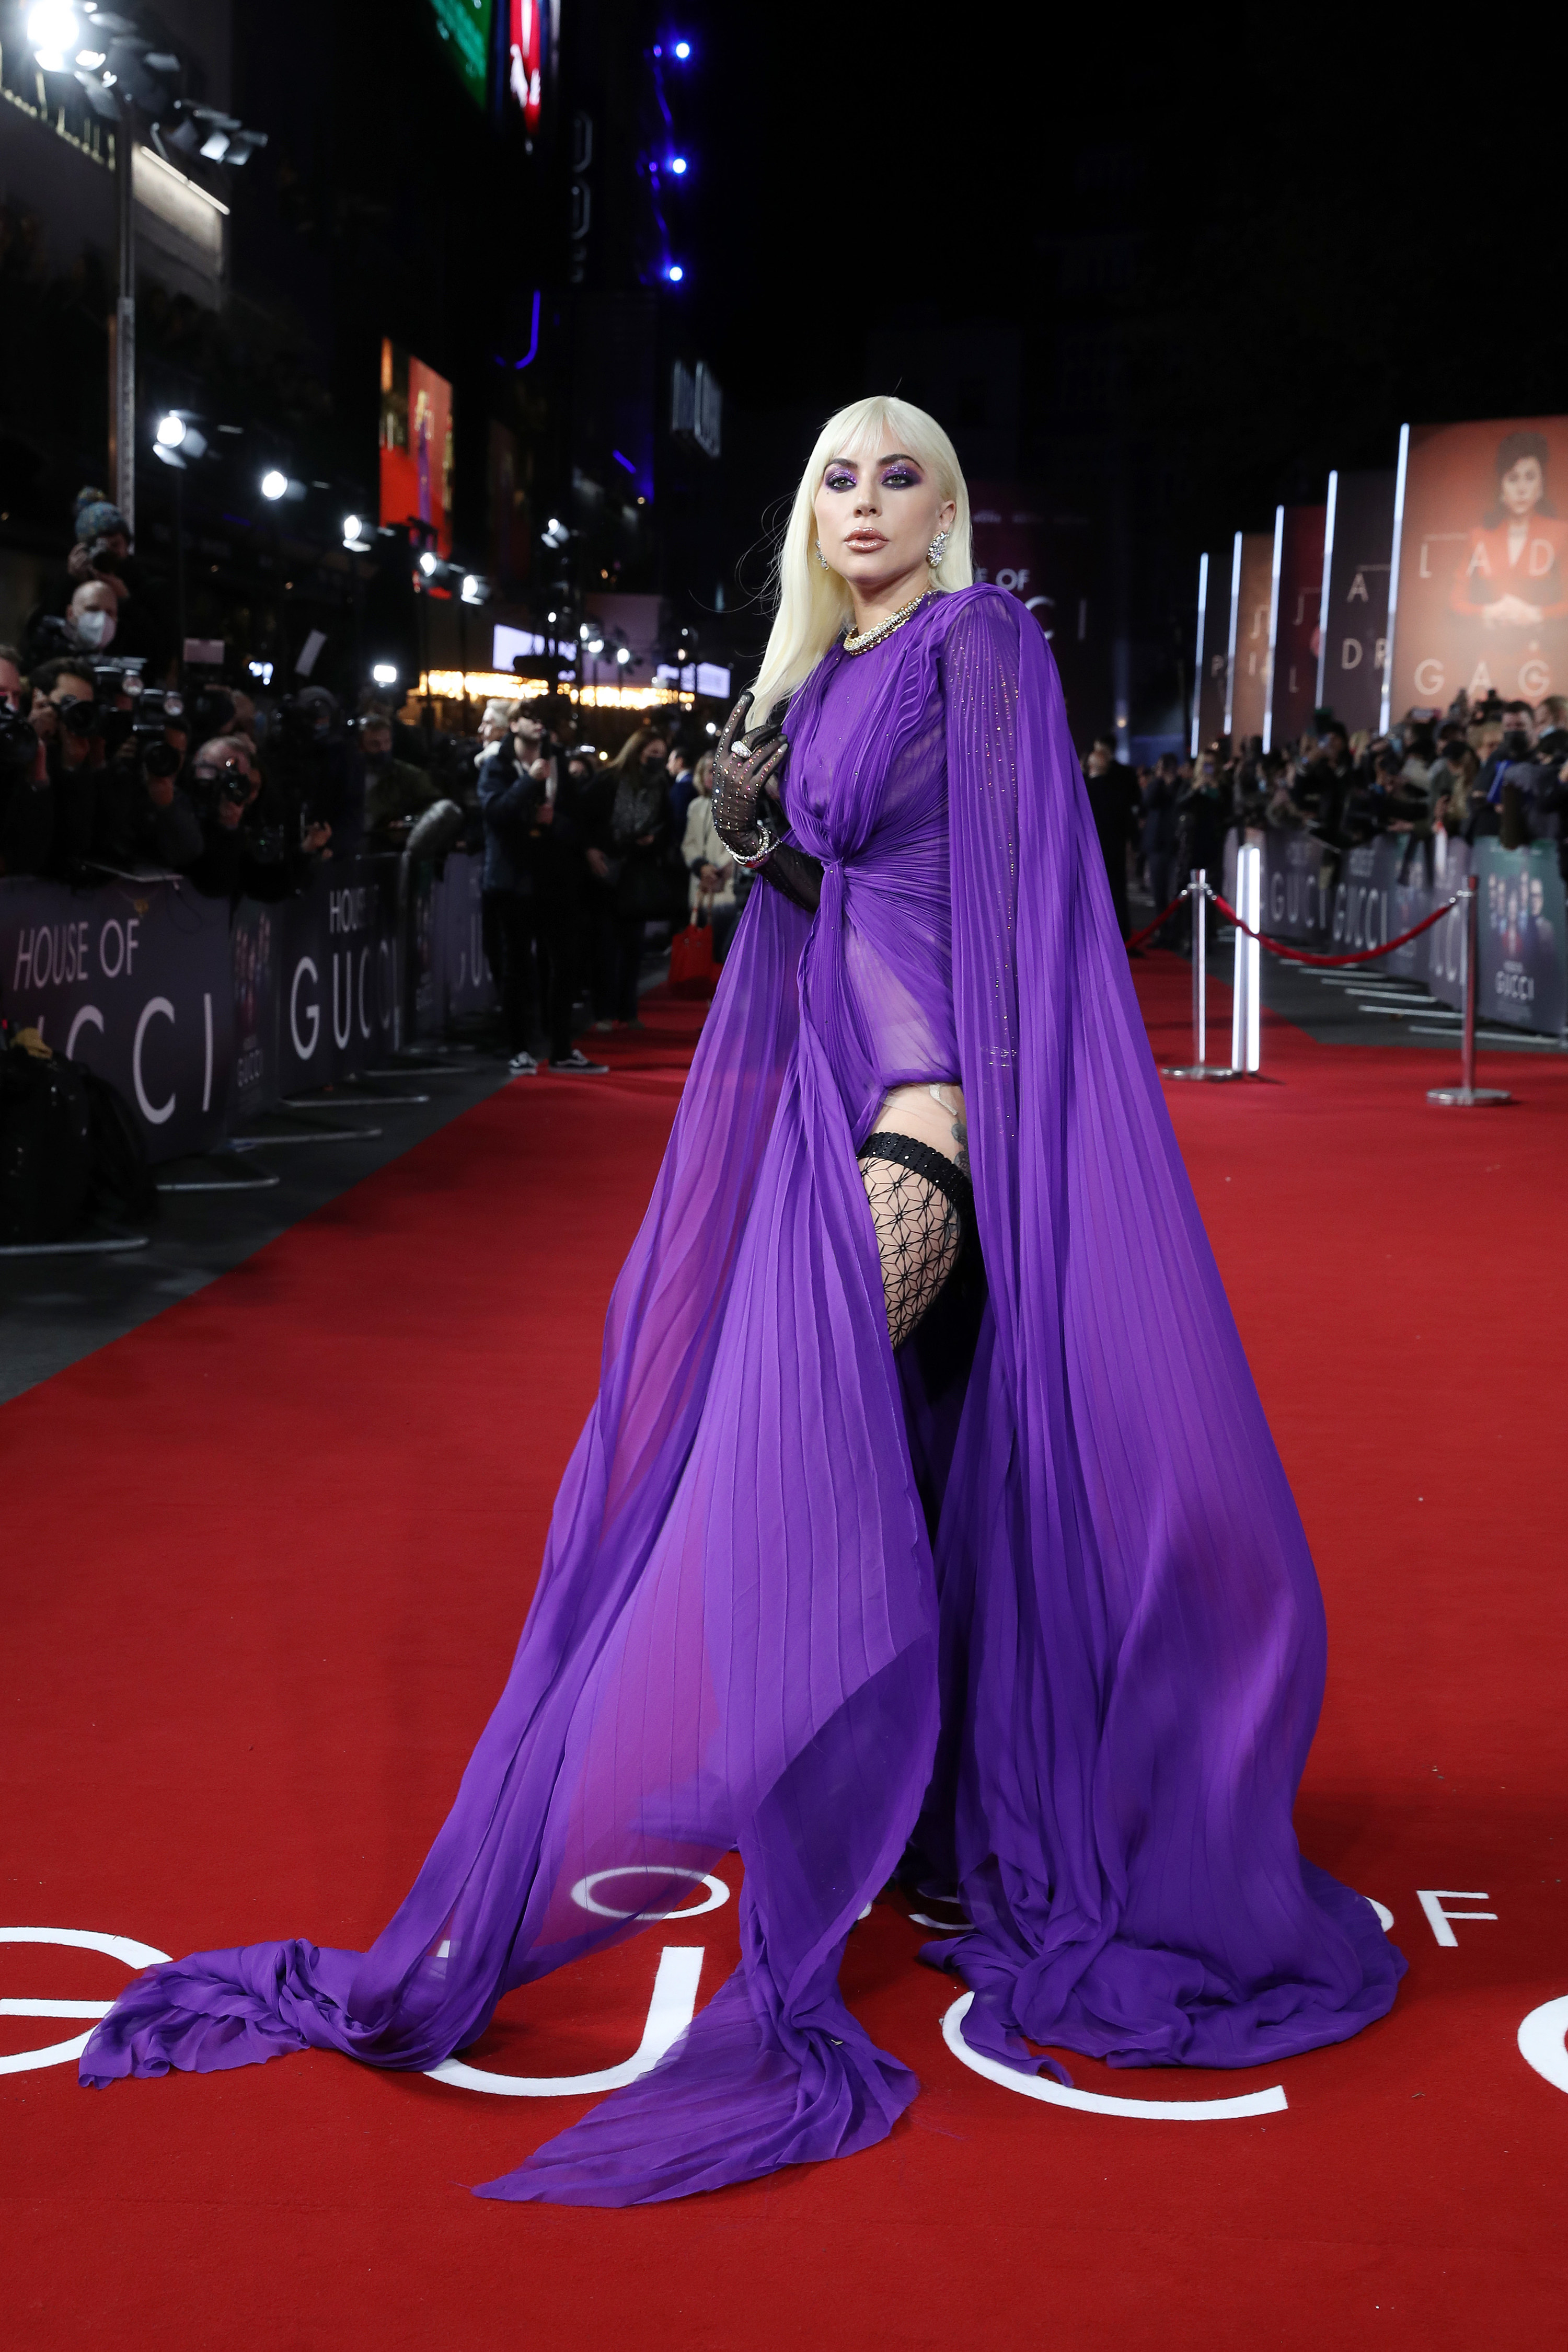 Gaga showing off the slit in her gown on the red carpet